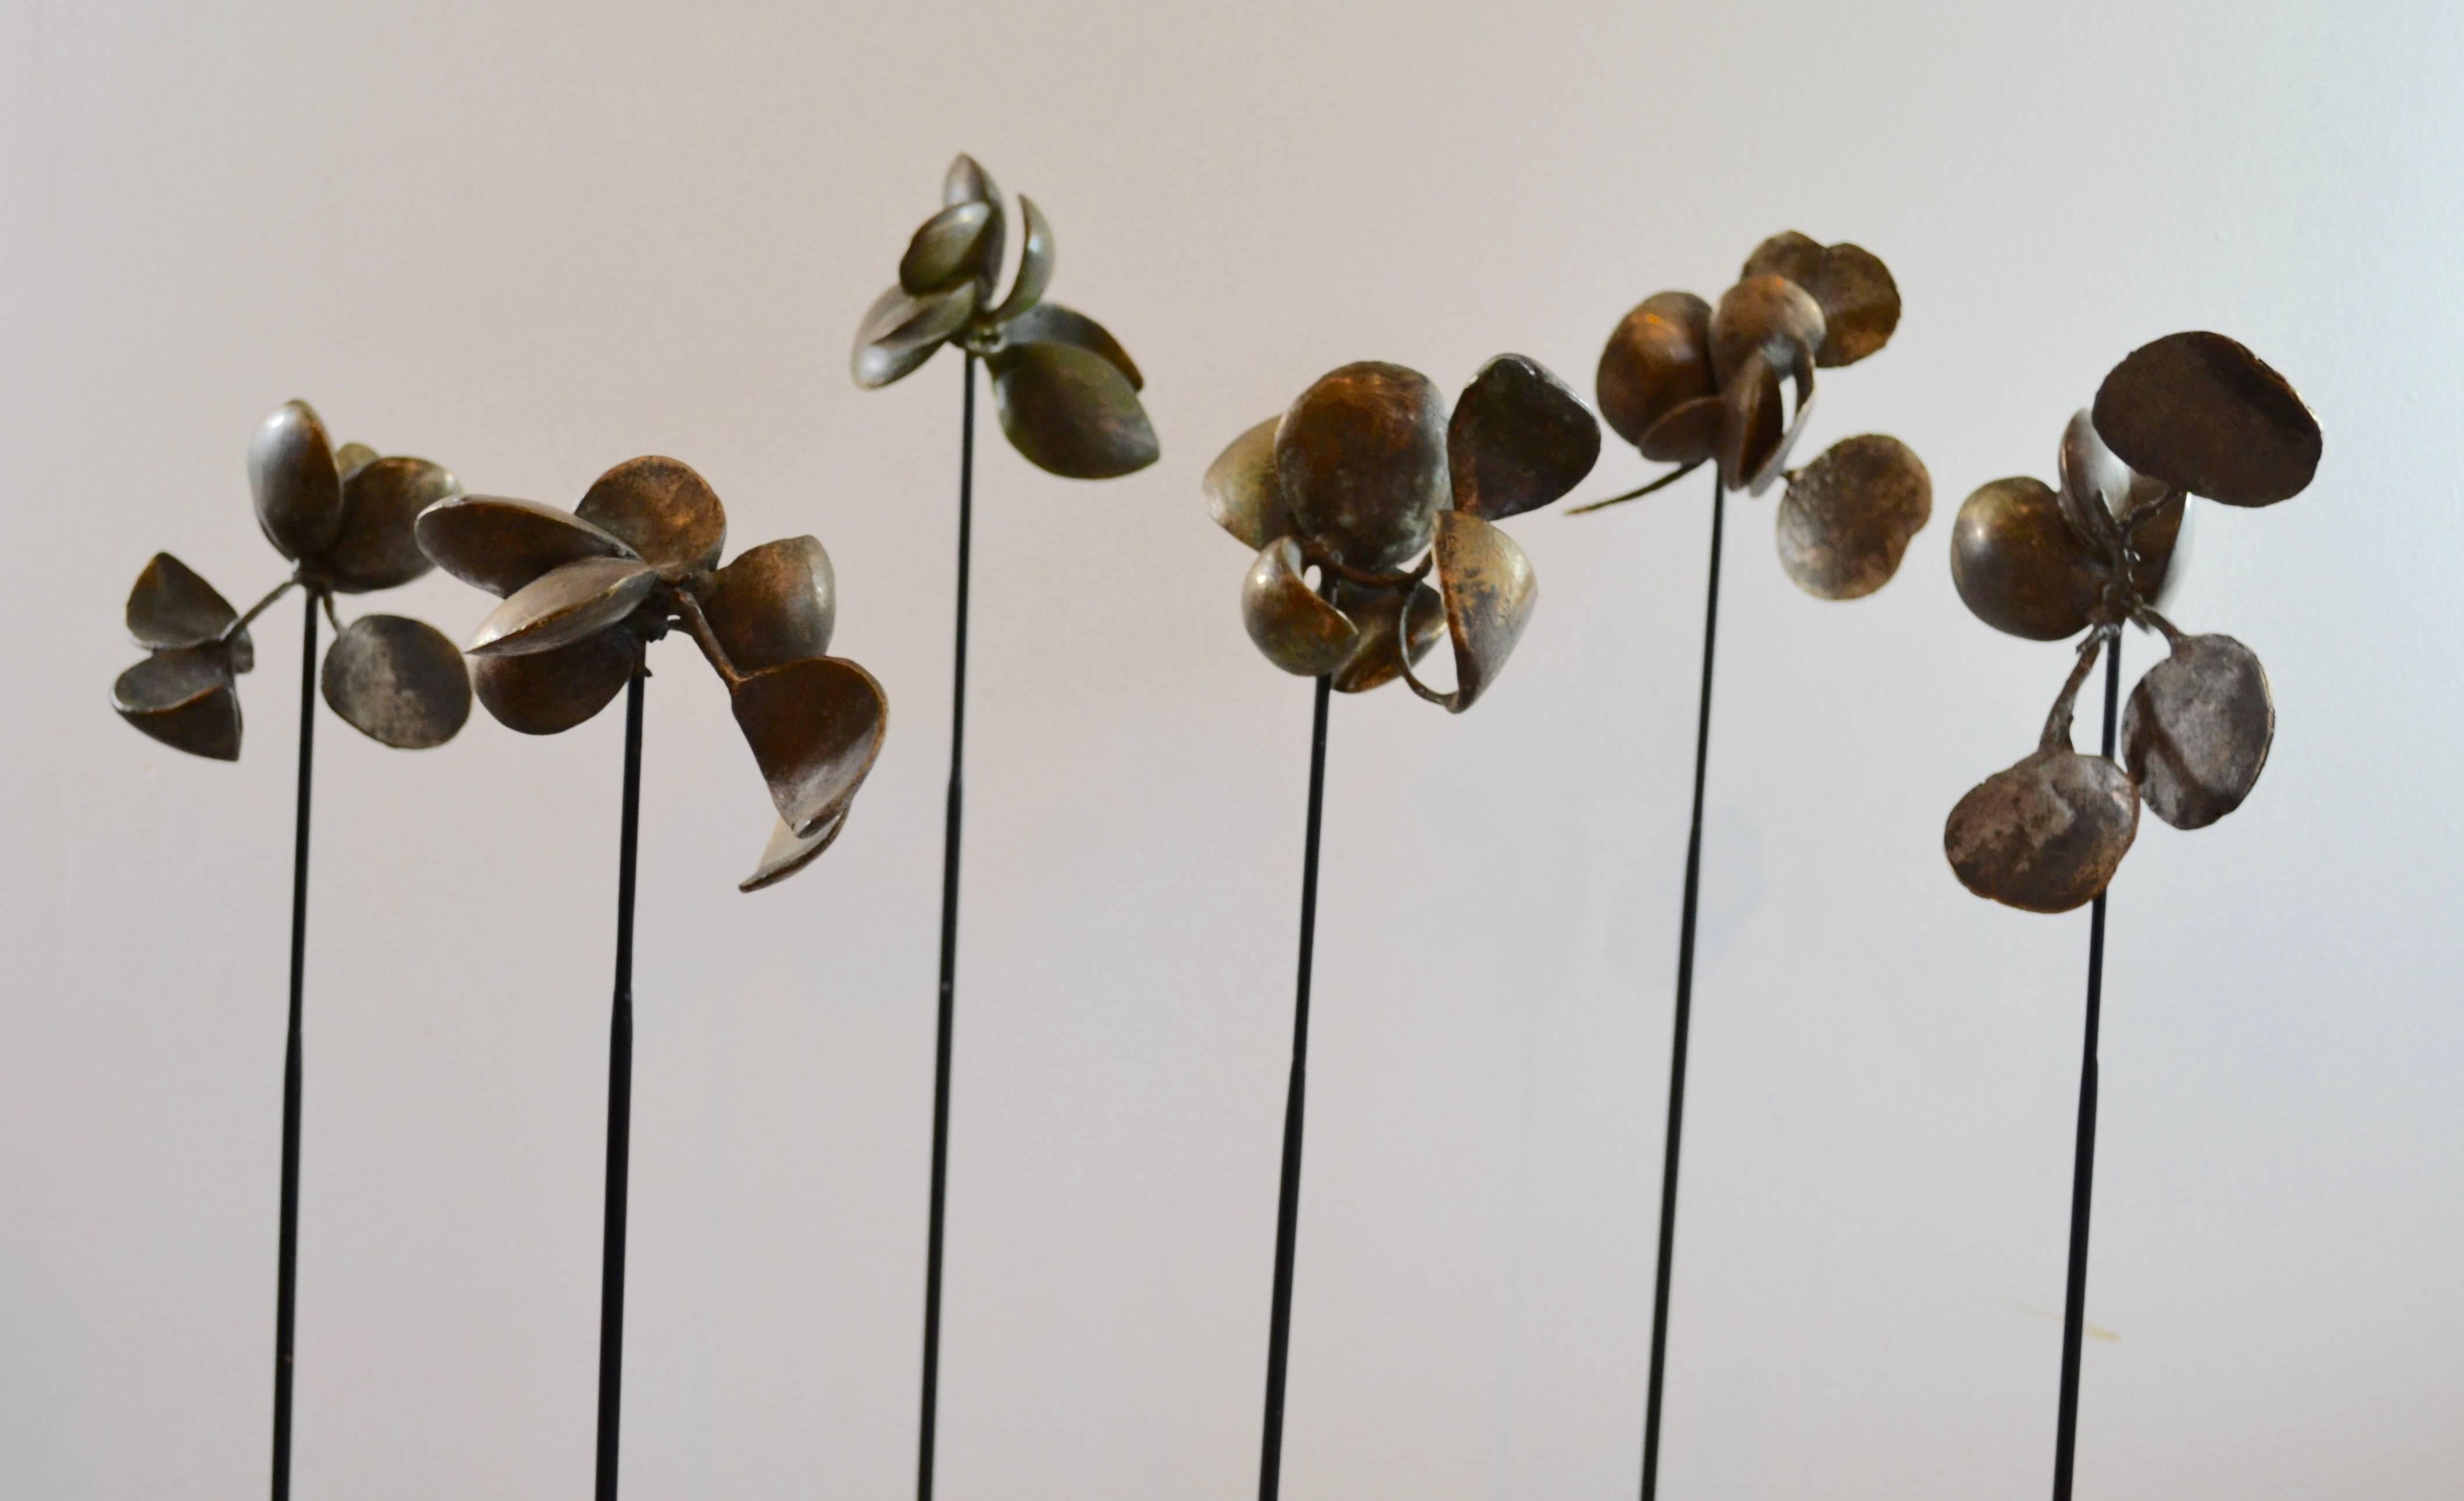 Suspended bronze flower petals mounted on metal rods. Highly finished bronze with a beautiful patina. Each one of a kind sculpture is handcrafted by the artist, Sharon Wandel, elected member of the national academy of design NYC, 1994. Please note